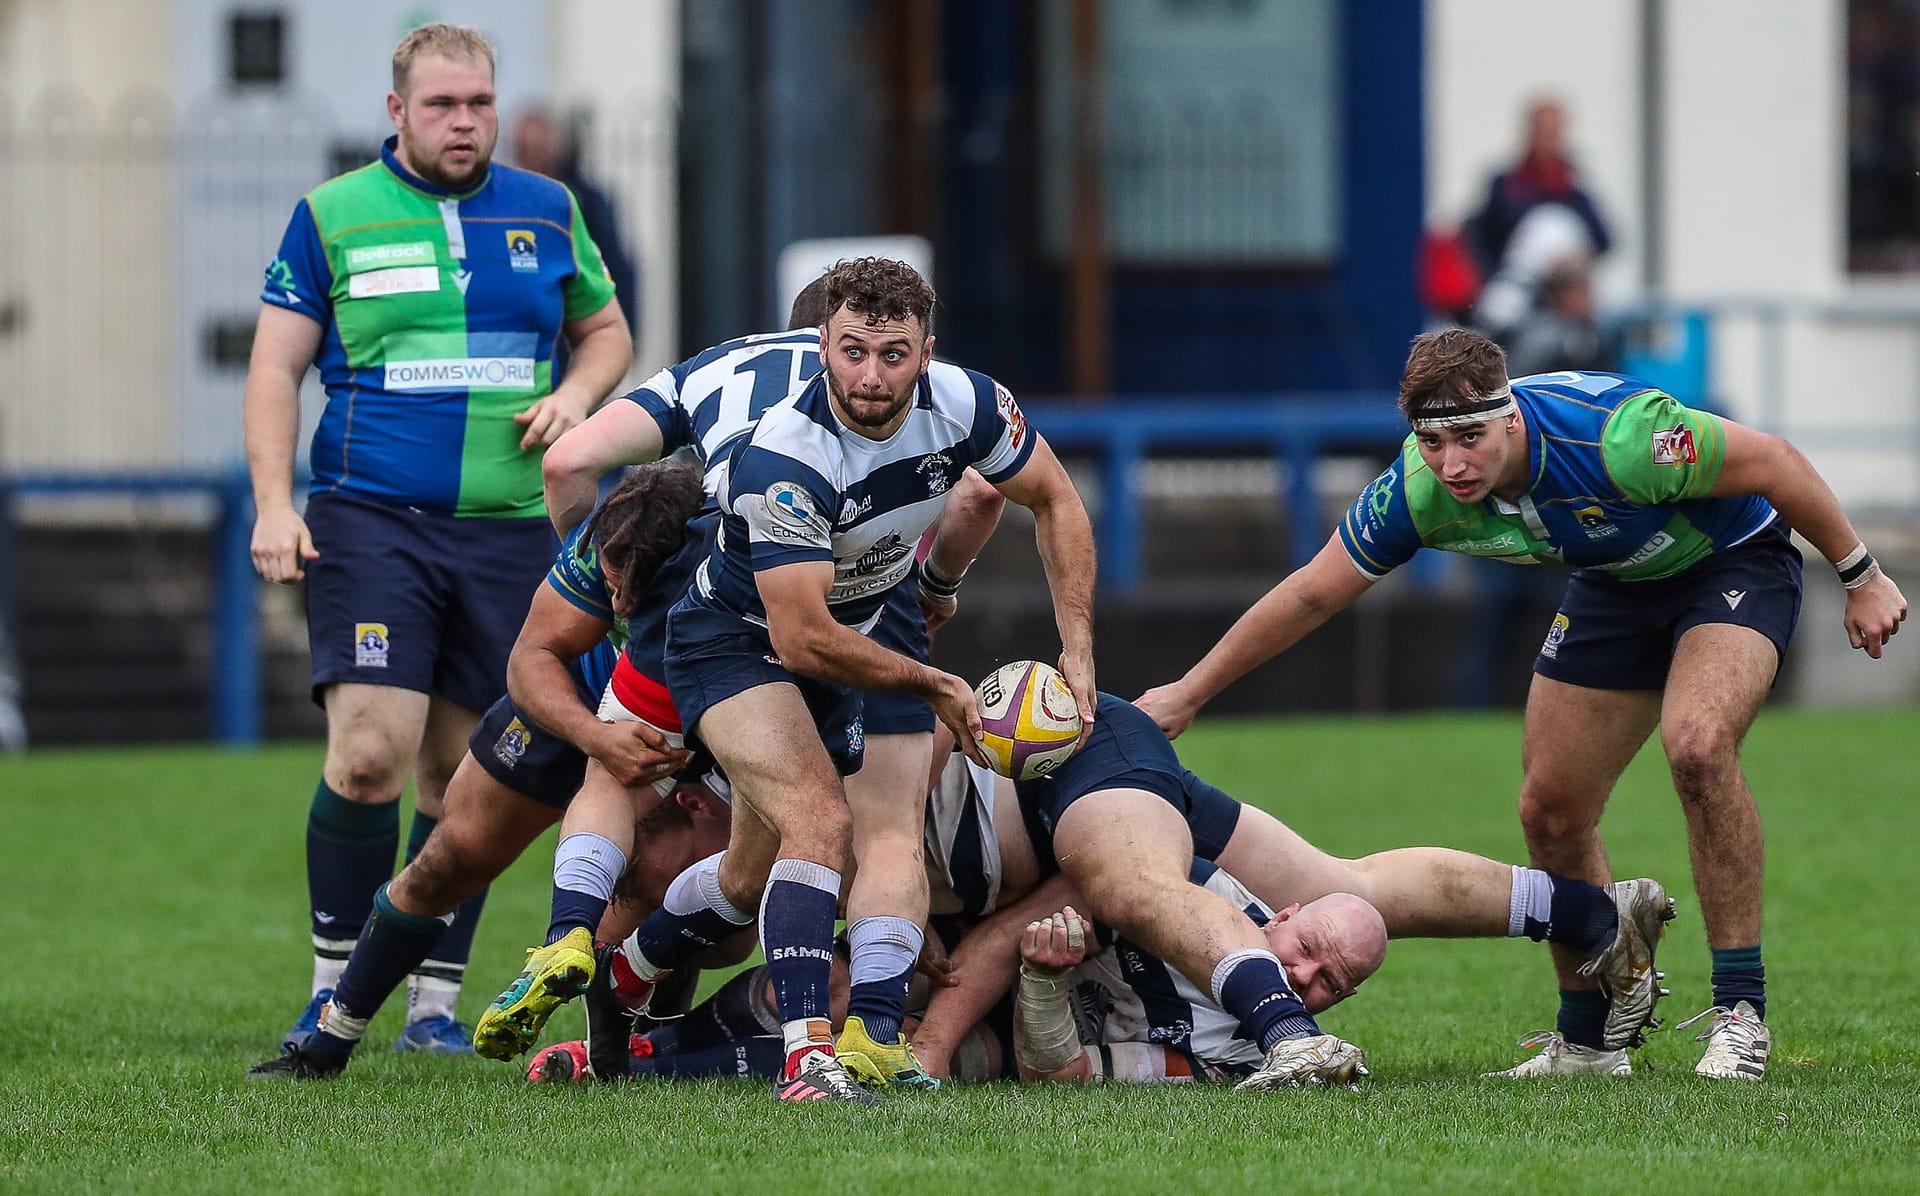 Heriots Lloyd Wheeldon passes from the base of a ruck.FOSROC Super 6 match between Heriot's Rugby and Boroughmuir Bears at Goldenacre, Edinburgh on 09/10/2021. (Photo: 39 Design Photography)